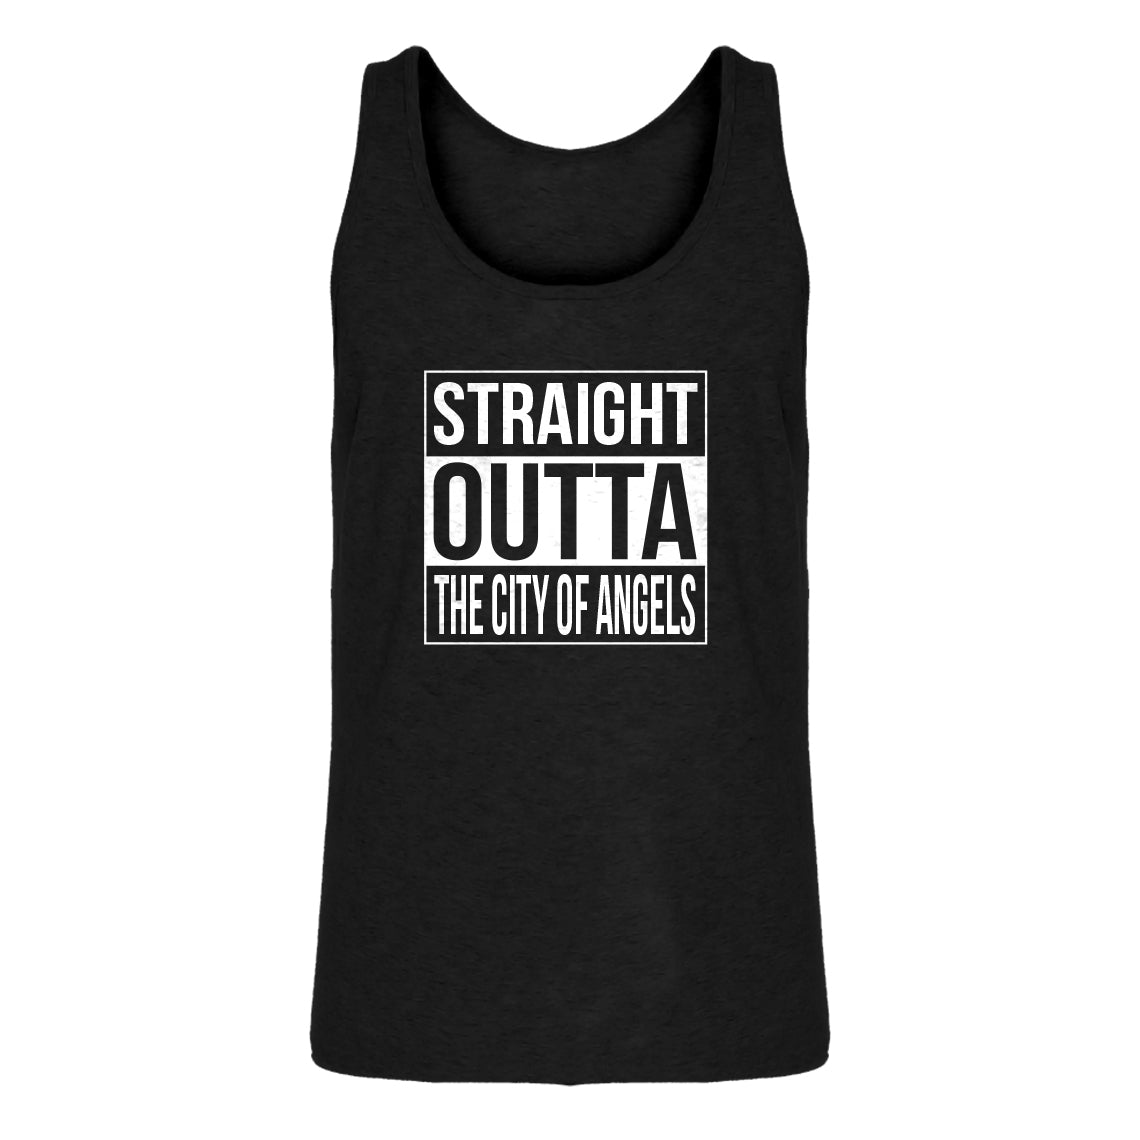 Mens Straight Outta The City of Angels Jersey Tank Top